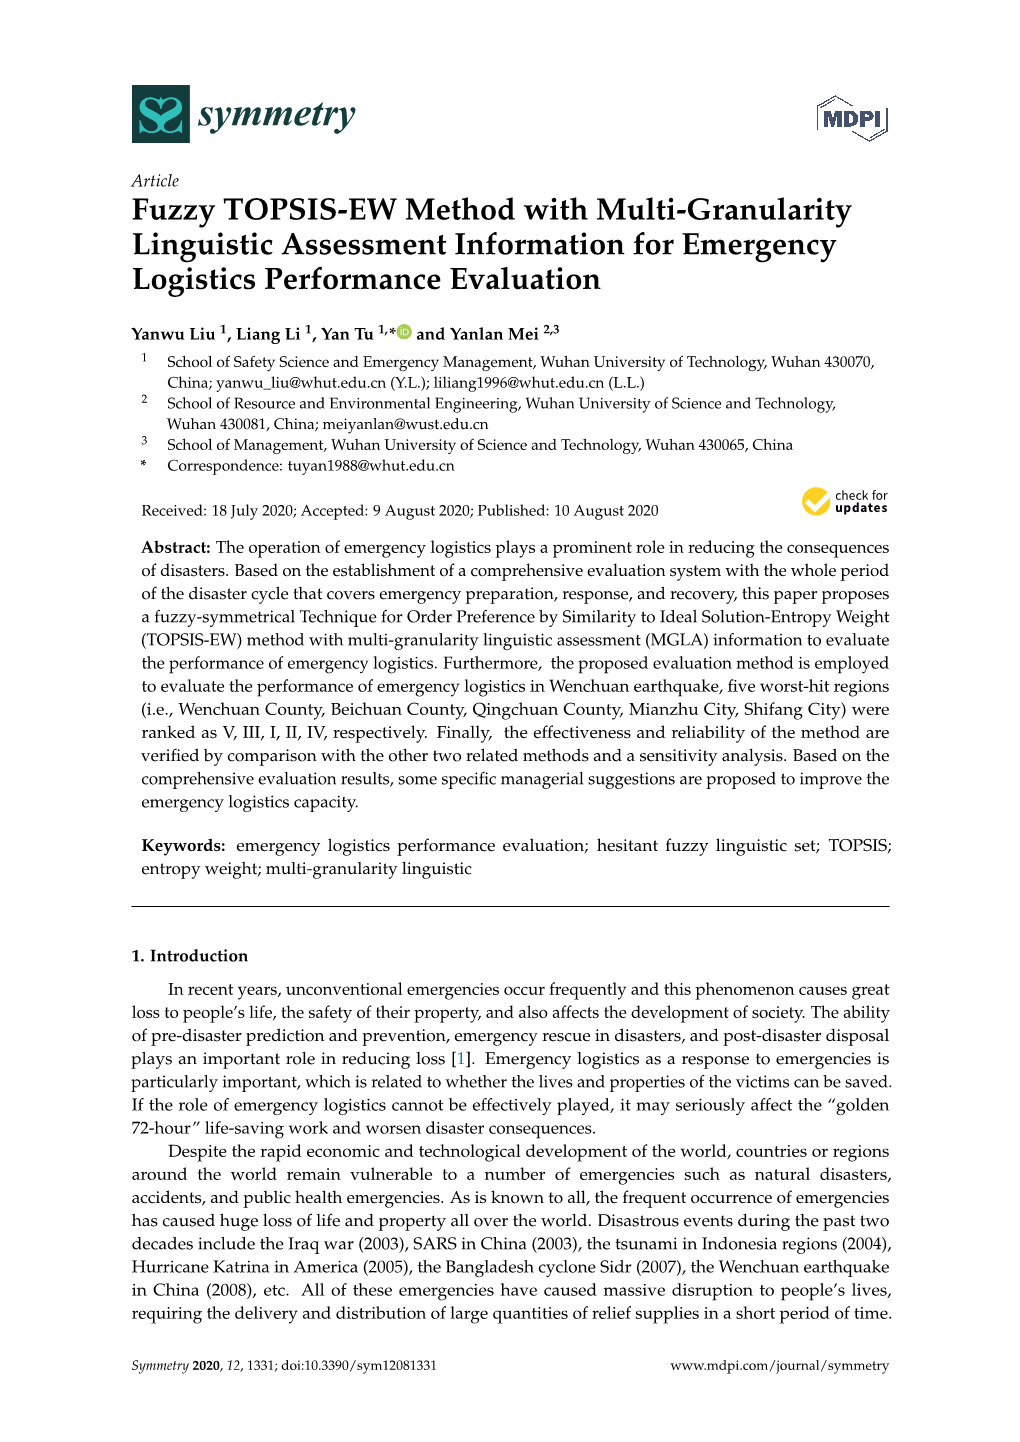 Fuzzy TOPSIS-EW Method with Multi-Granularity Linguistic Assessment Information for Emergency Logistics Performance Evaluation